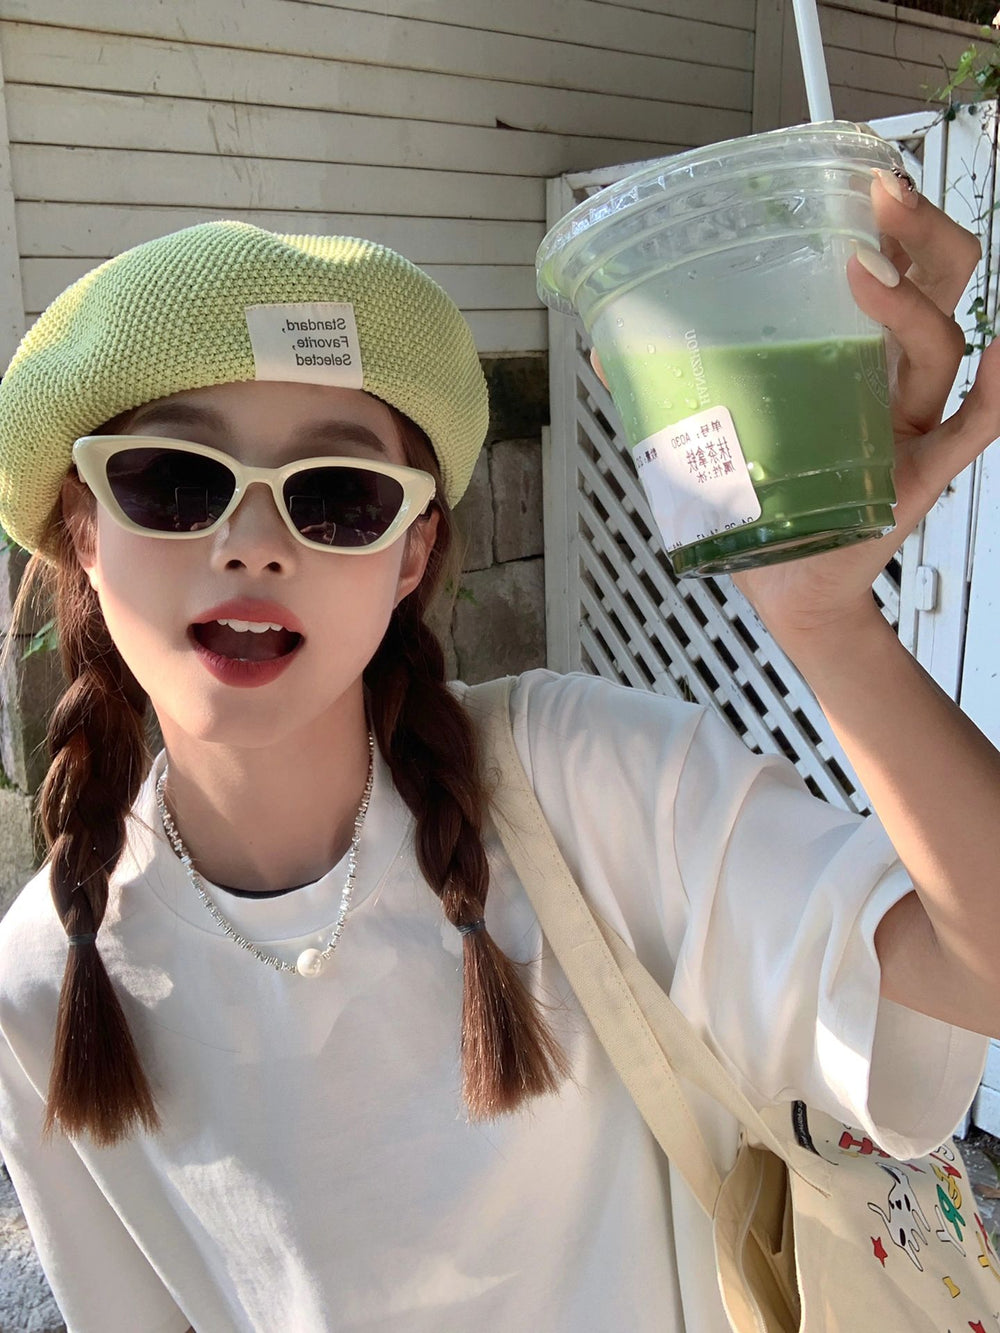 With an air of elegance, a woman sporting a fashionable hat and stylish sunglasses gracefully holds a cup of invigorating green juice, embodying both sophistication and a commitment to well-being.